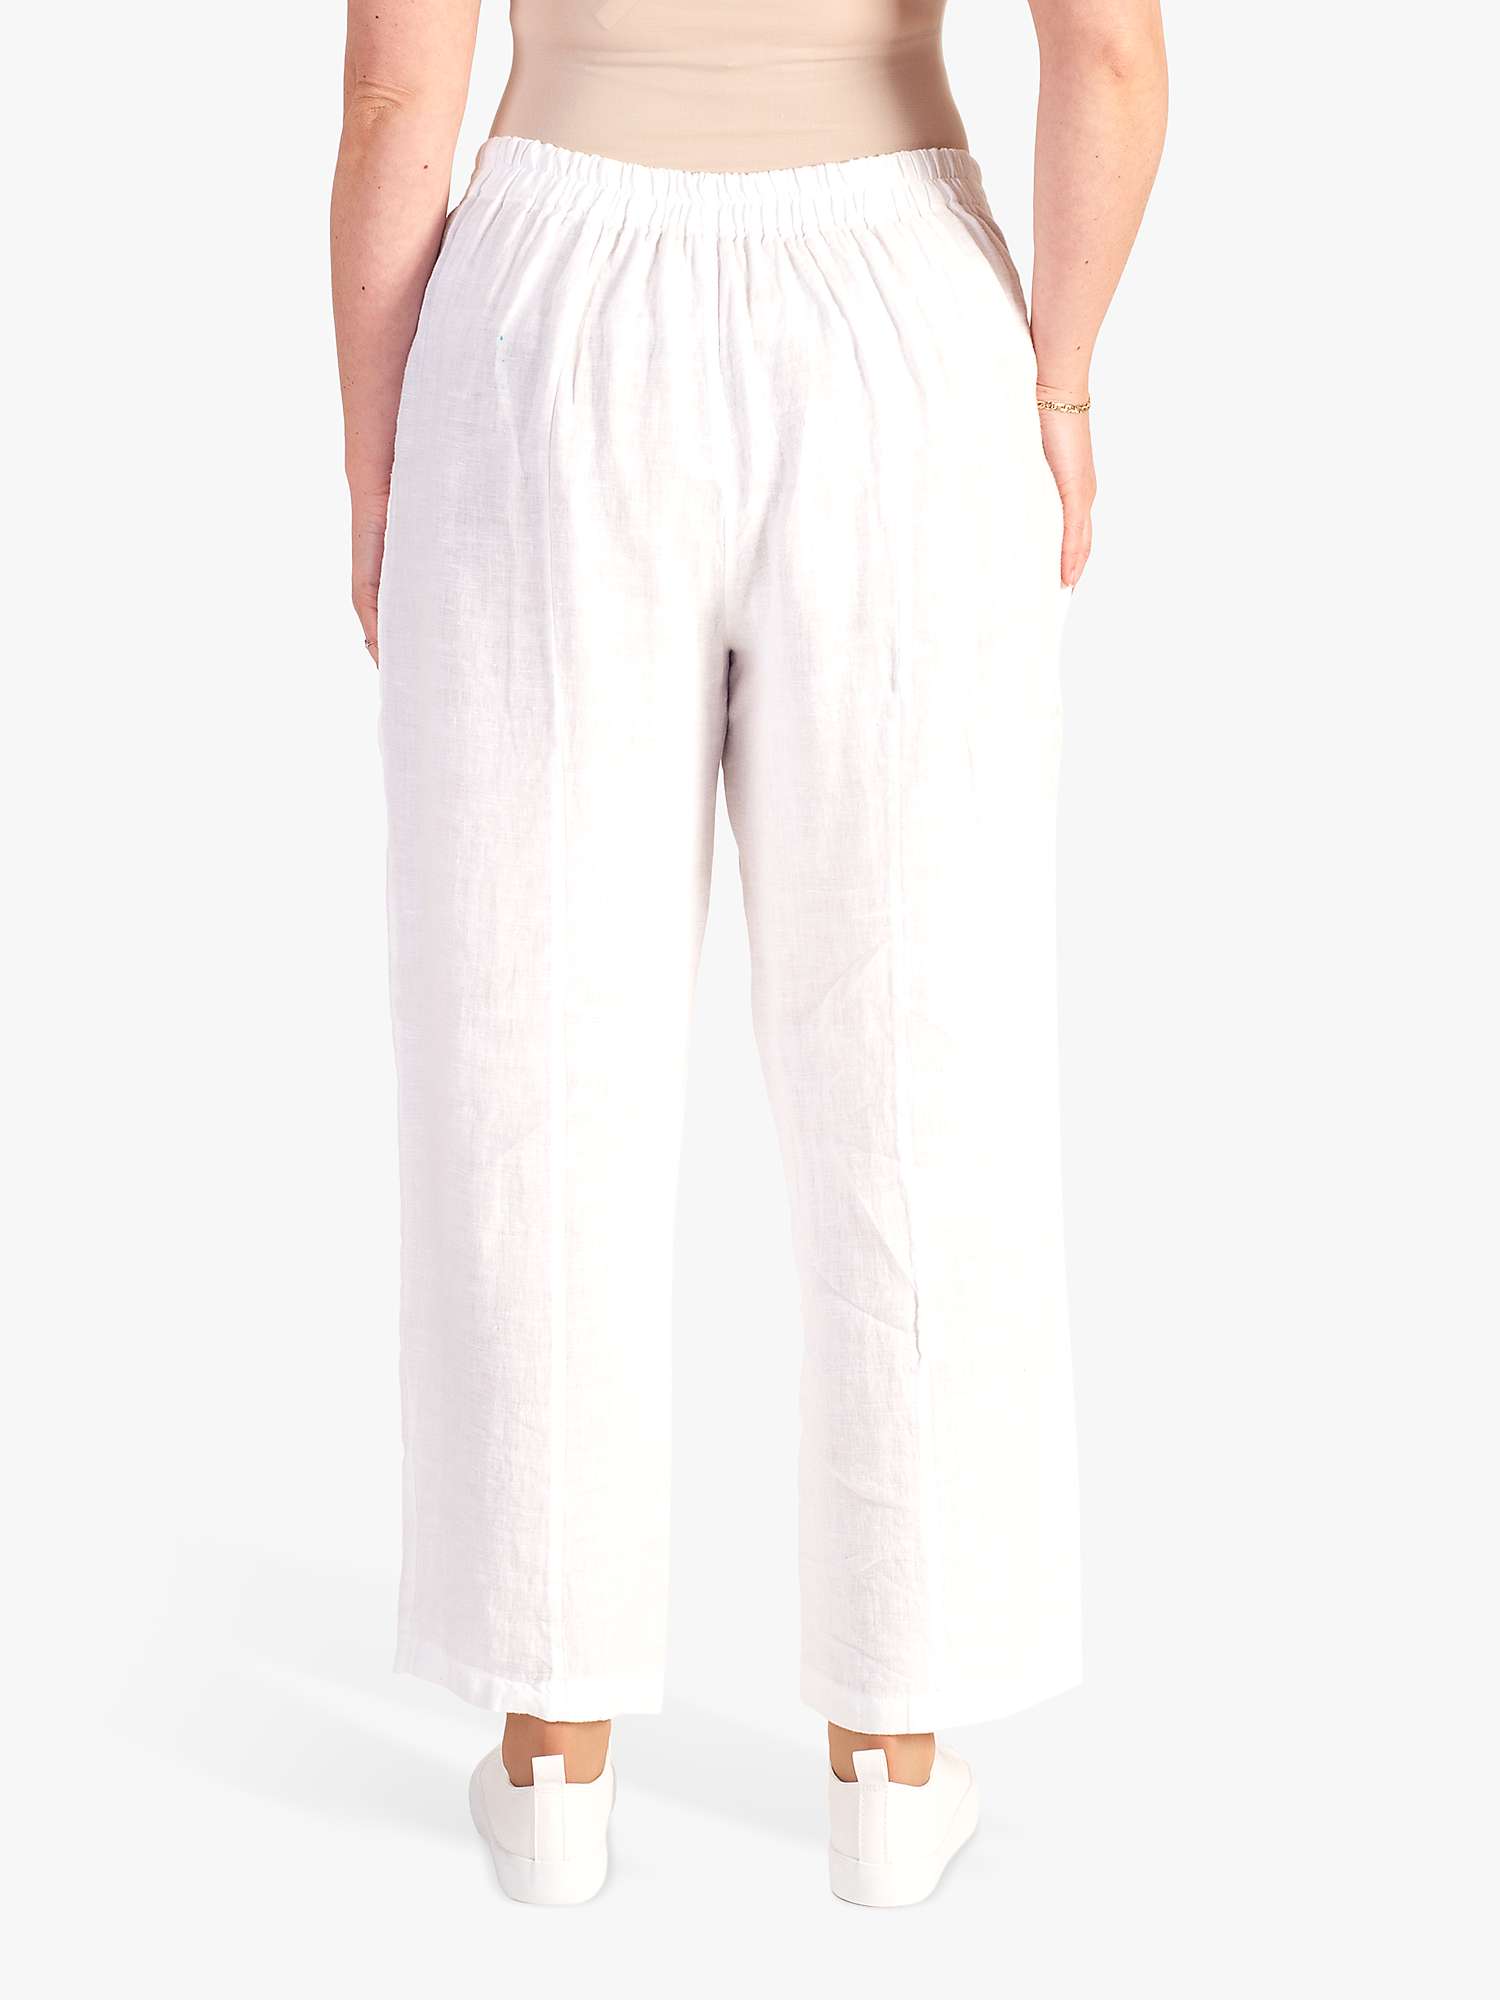 Buy chesca Linen Trousers, White Online at johnlewis.com